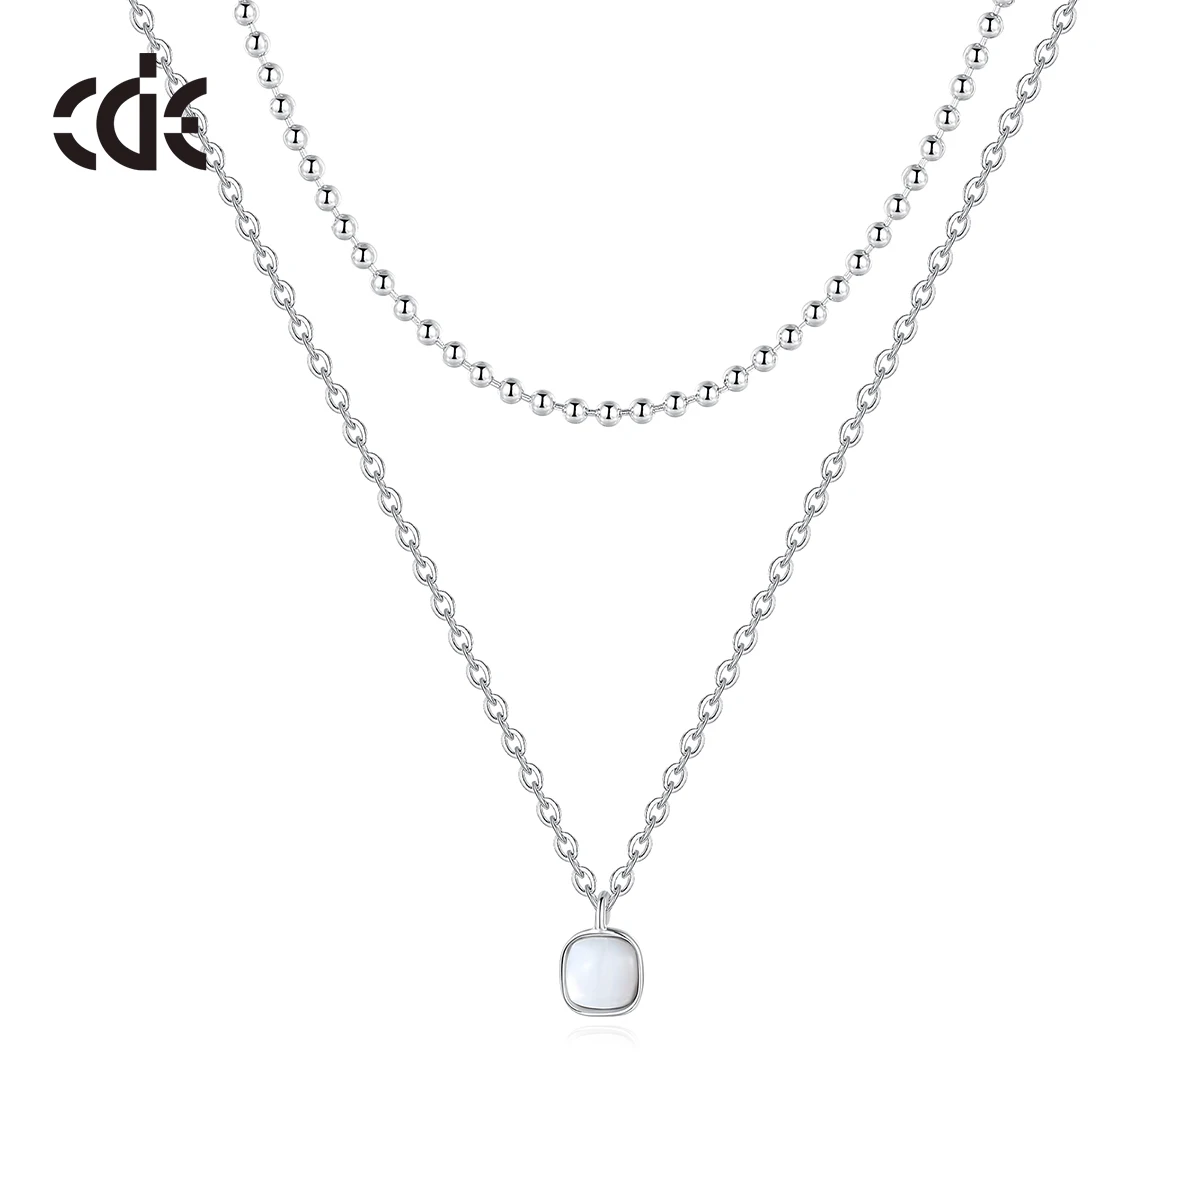 CDE PRYN008 Simple 925 Sterling Silver Jewelry Pearl Shell Necklace Wholesale  Woman Shell Double layer Bead Ball Chain